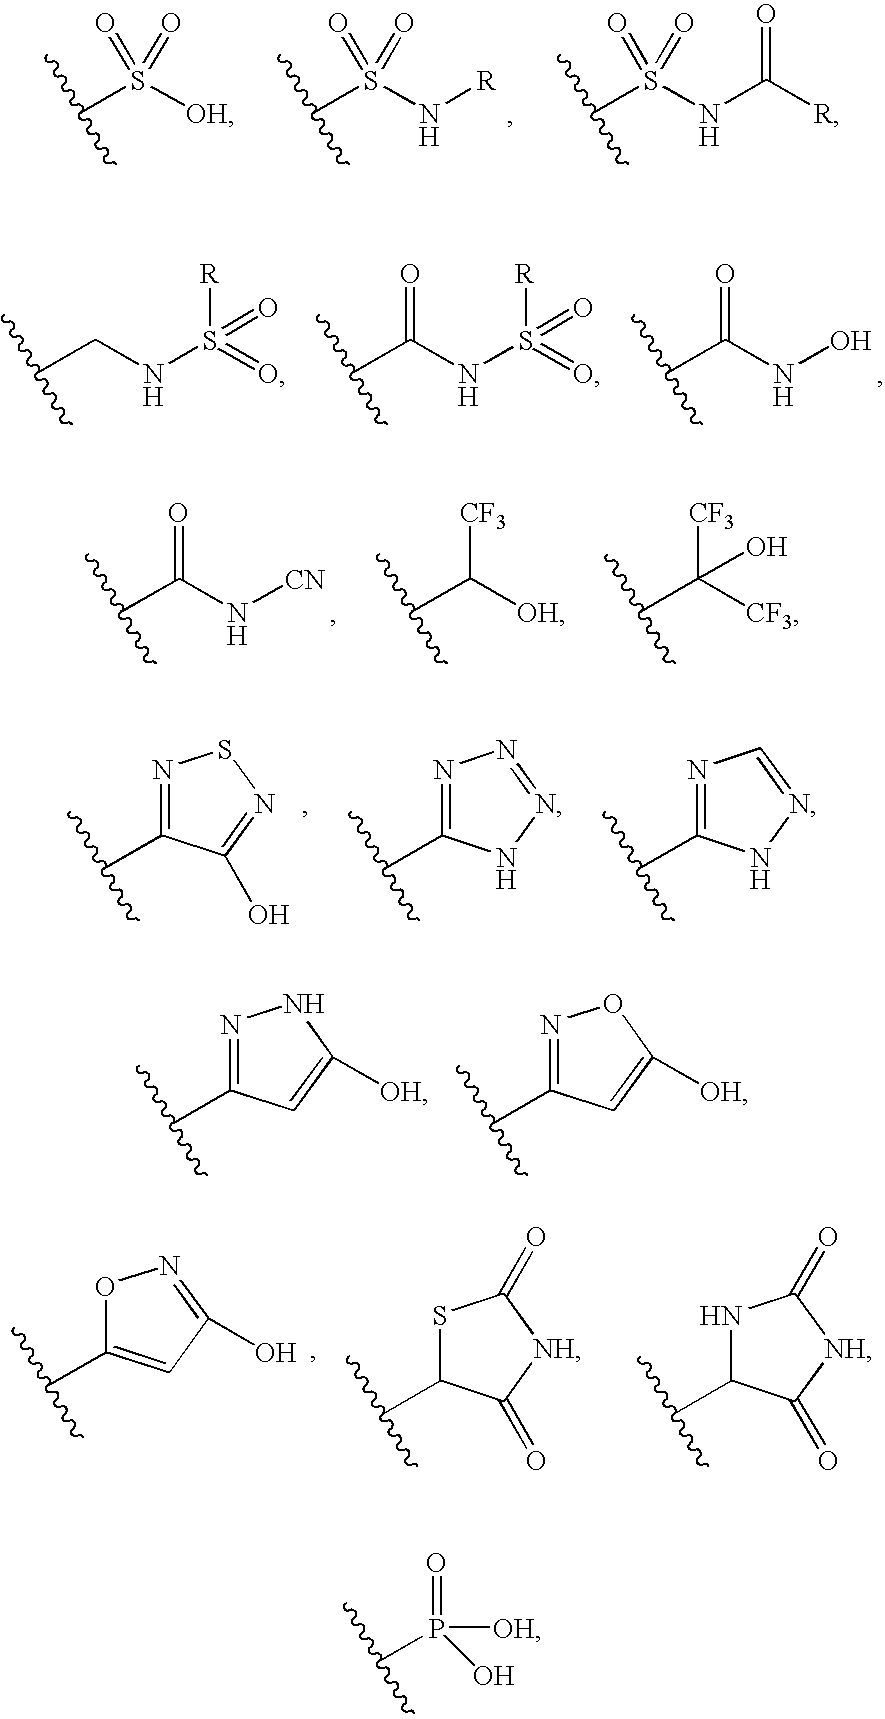 N-cyclohexyl benzamides and benzeneacetamides as inhibitors of 11-beta-hydroxysteroid dehydrogenases